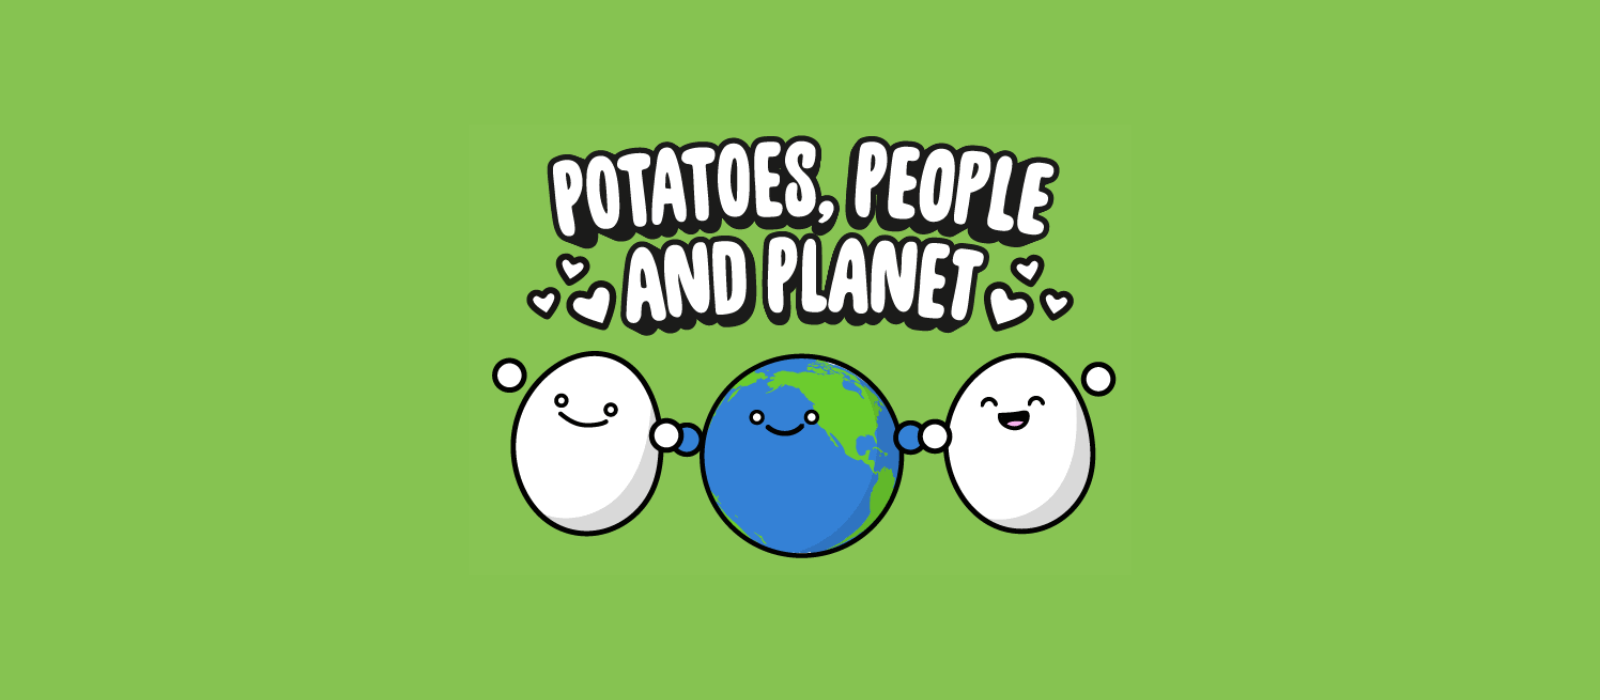 Big Potato are officially a B Corp! Big on potatoes, people and planet.